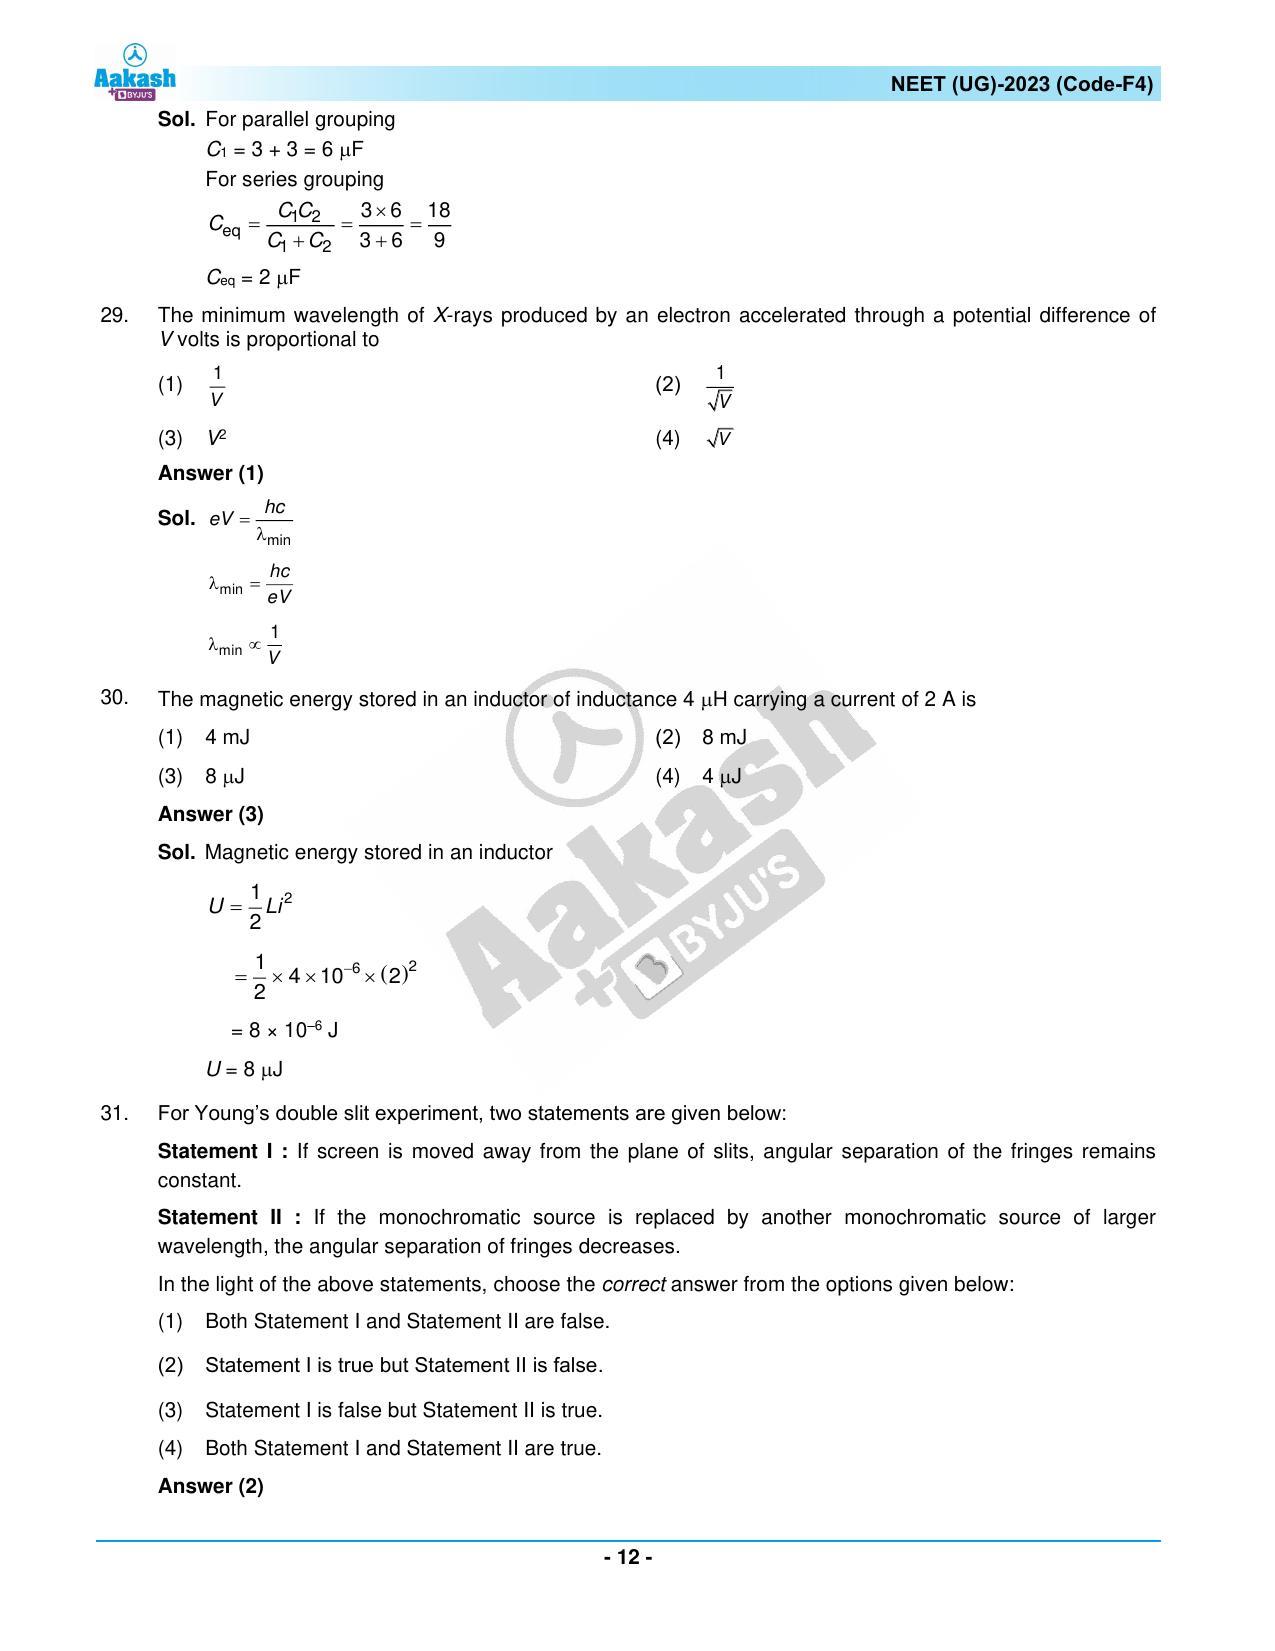 NEET 2023 Question Paper F4 - Page 12